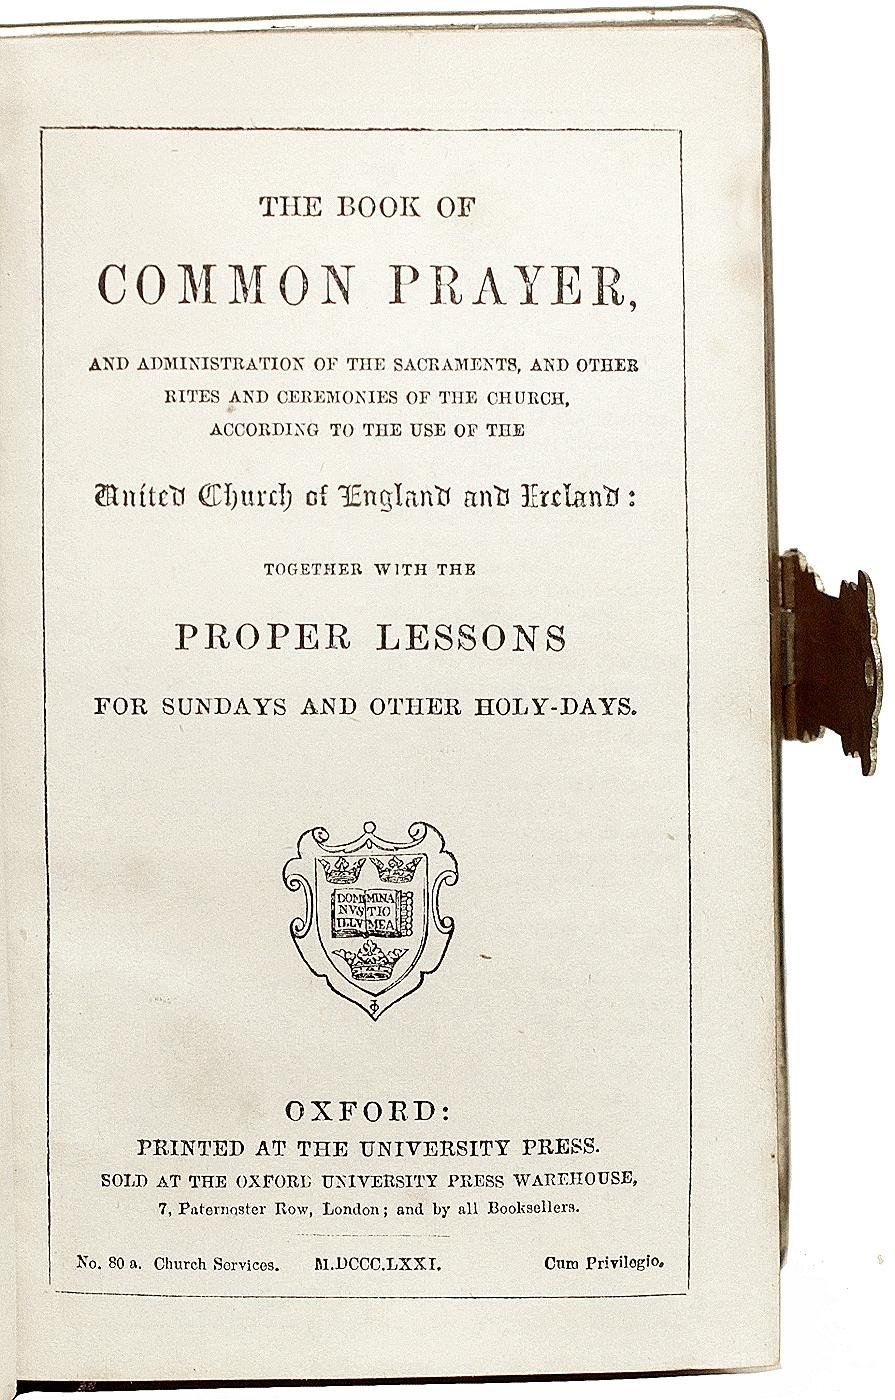 AUTHOR: BOOK OF COMMON PRAYER. 

TITLE: The Book Of Common Prayer, And Administration of the Sacraments, & other Rites & Ceremonies of The Church, According to the use of The United Church of England & Ireland:....

PUBLISHER: Oxford: At The